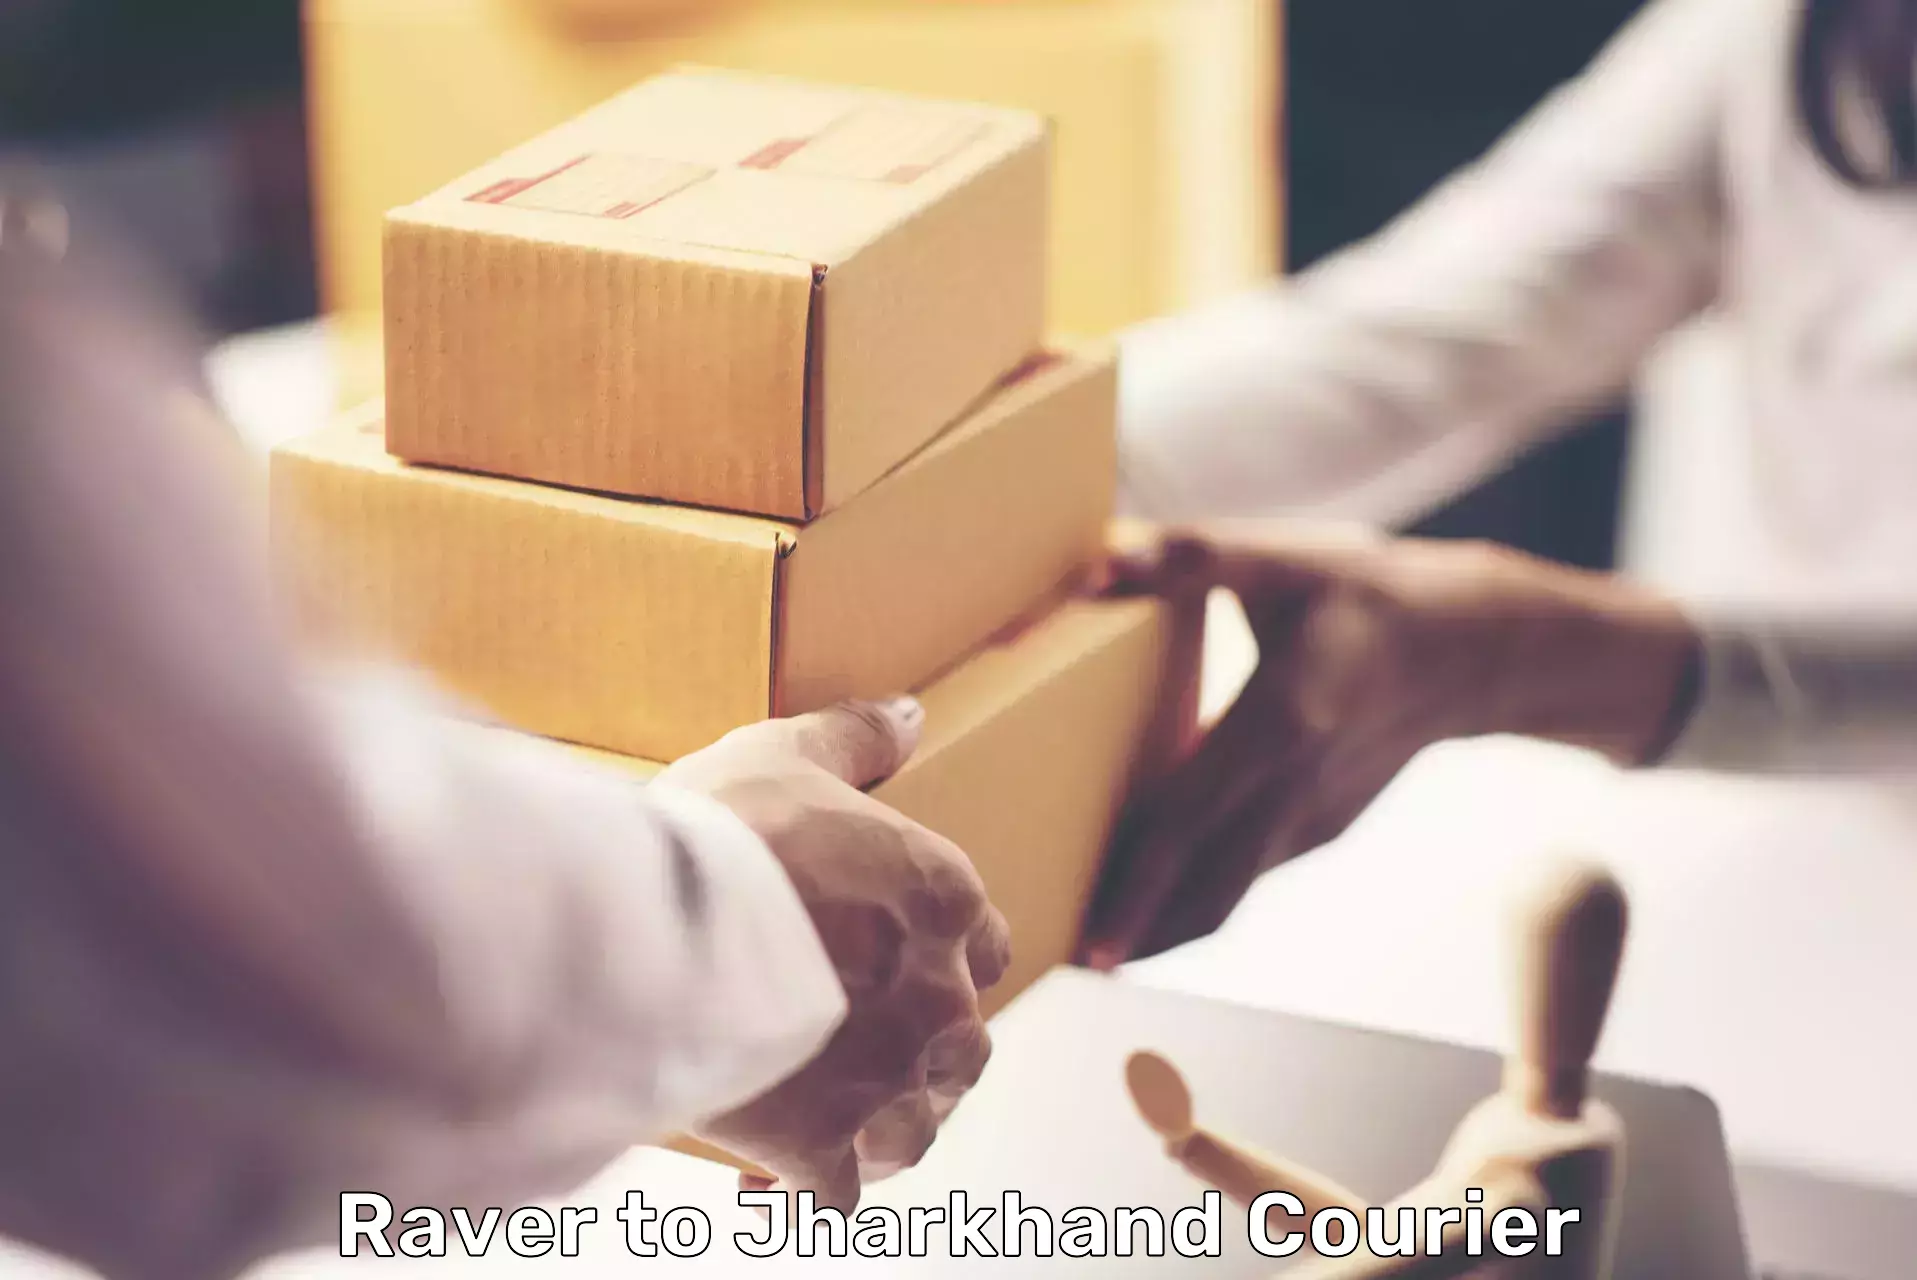 Courier service efficiency Raver to Godabar Chatra